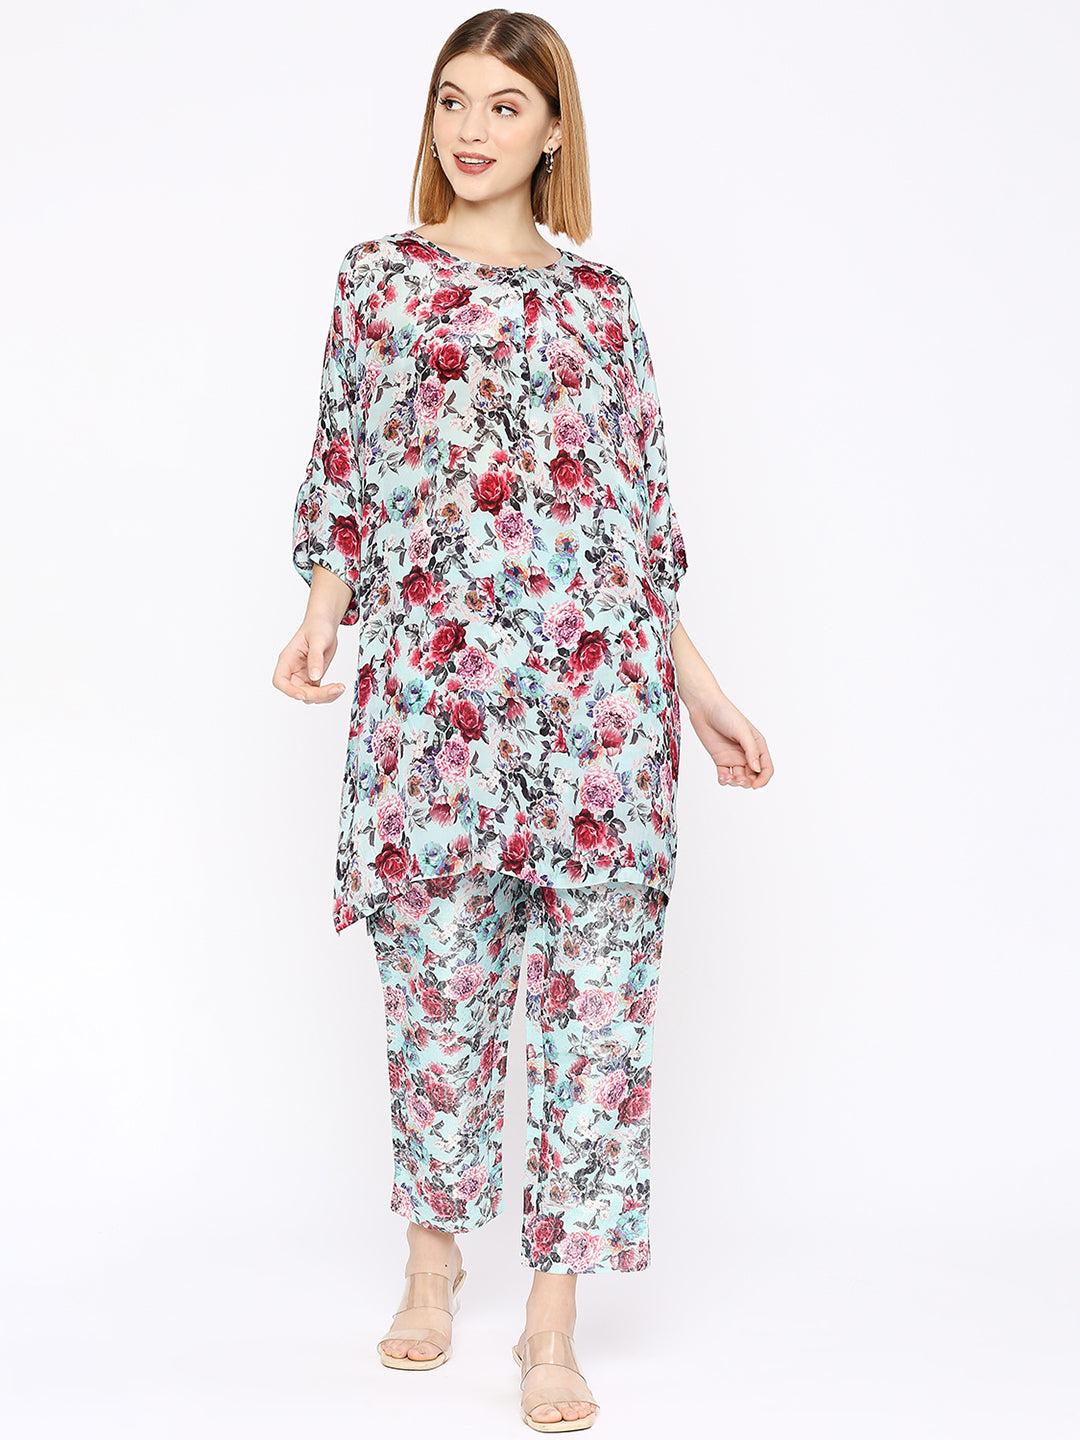 Aqua Multicolored Floral Printed Co-Ord Set with Brocade Pant